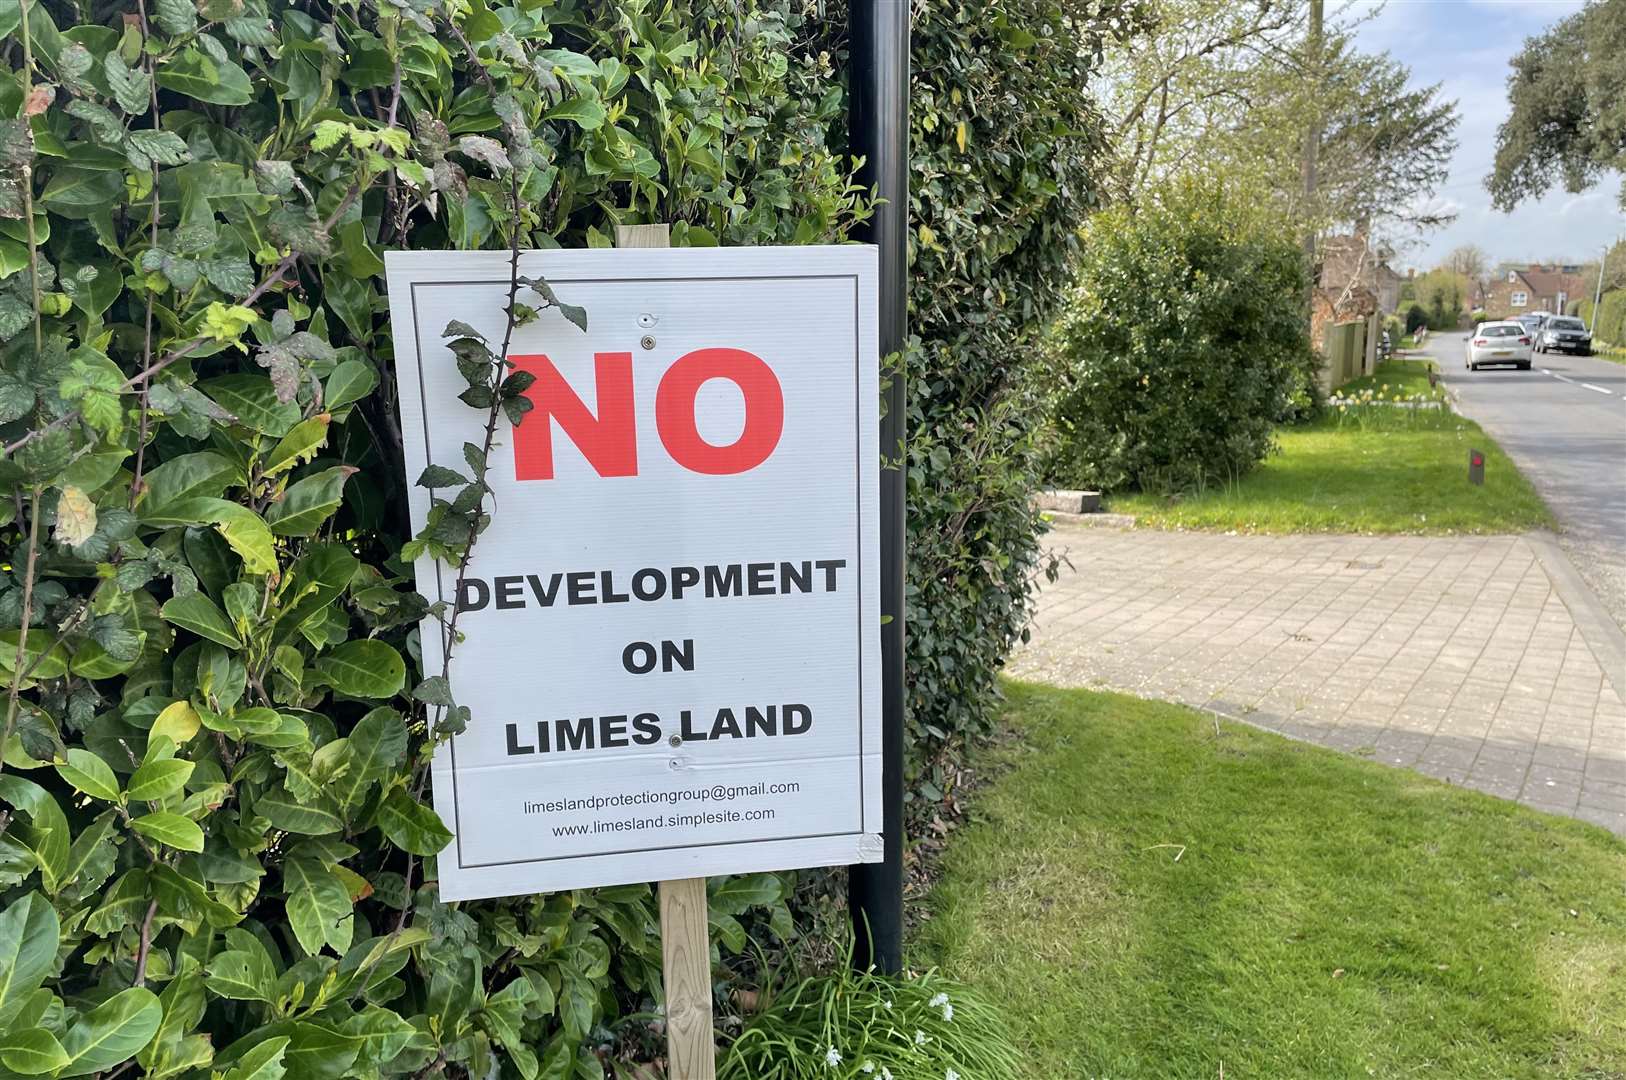 Residents have long been campaigning against the development